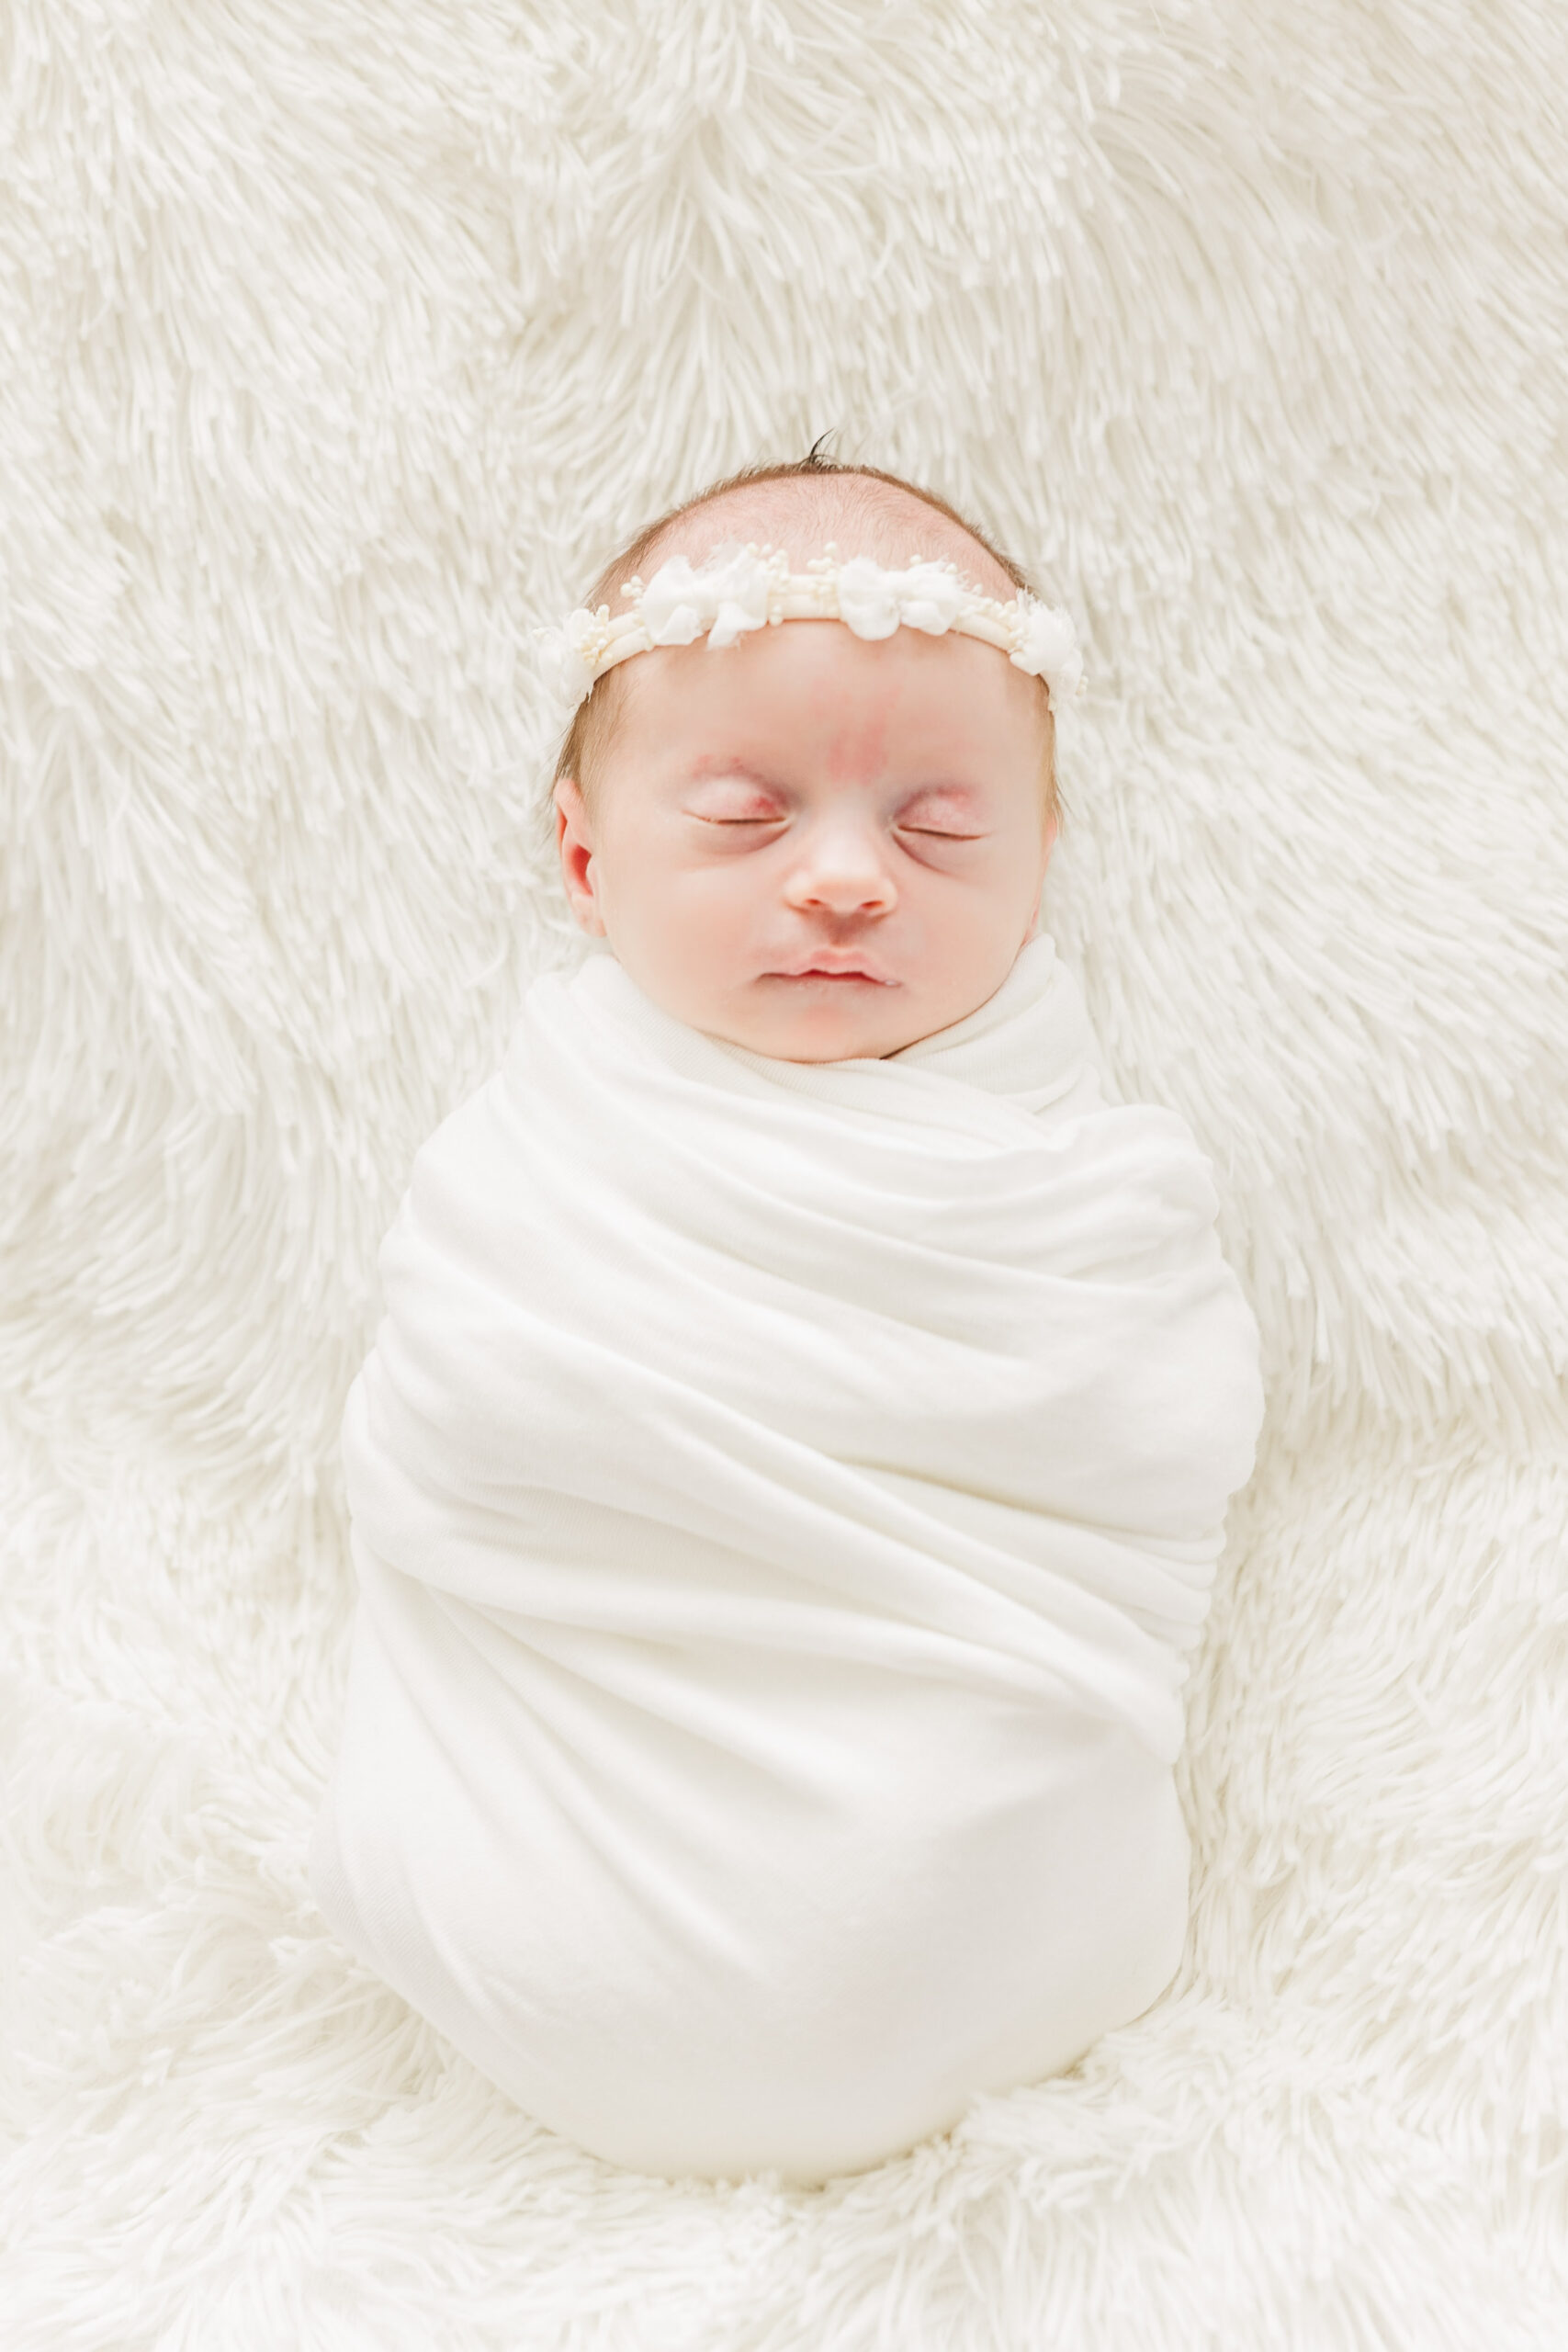 Swaddled baby girl sleeping with a headband on with a white background for Conklin Family Newborn Session